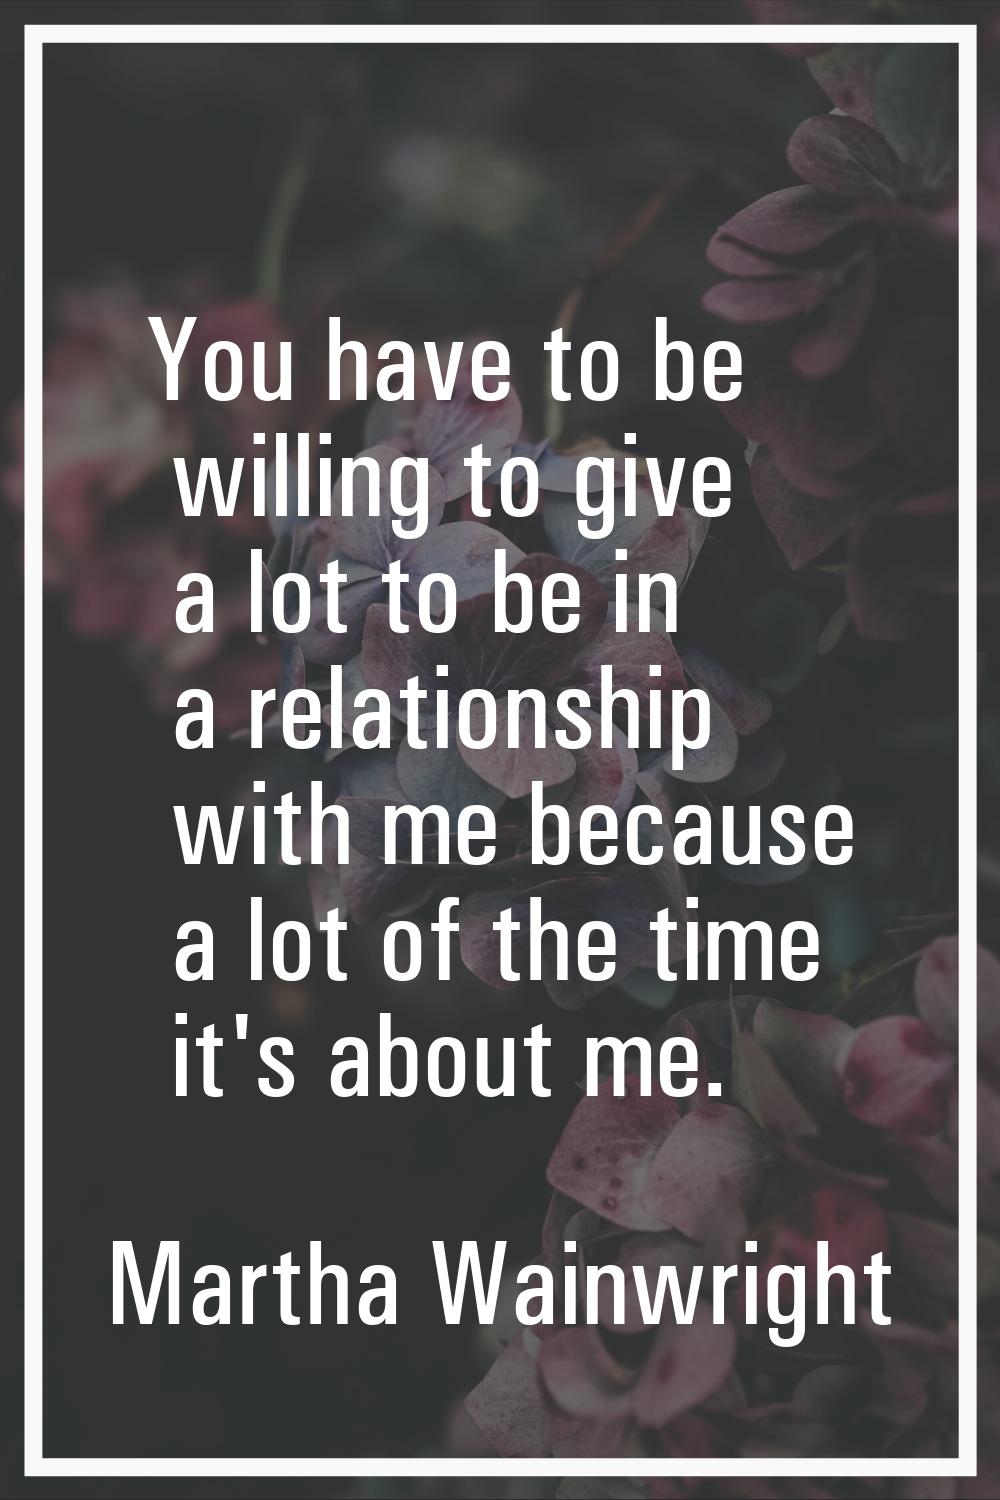 You have to be willing to give a lot to be in a relationship with me because a lot of the time it's